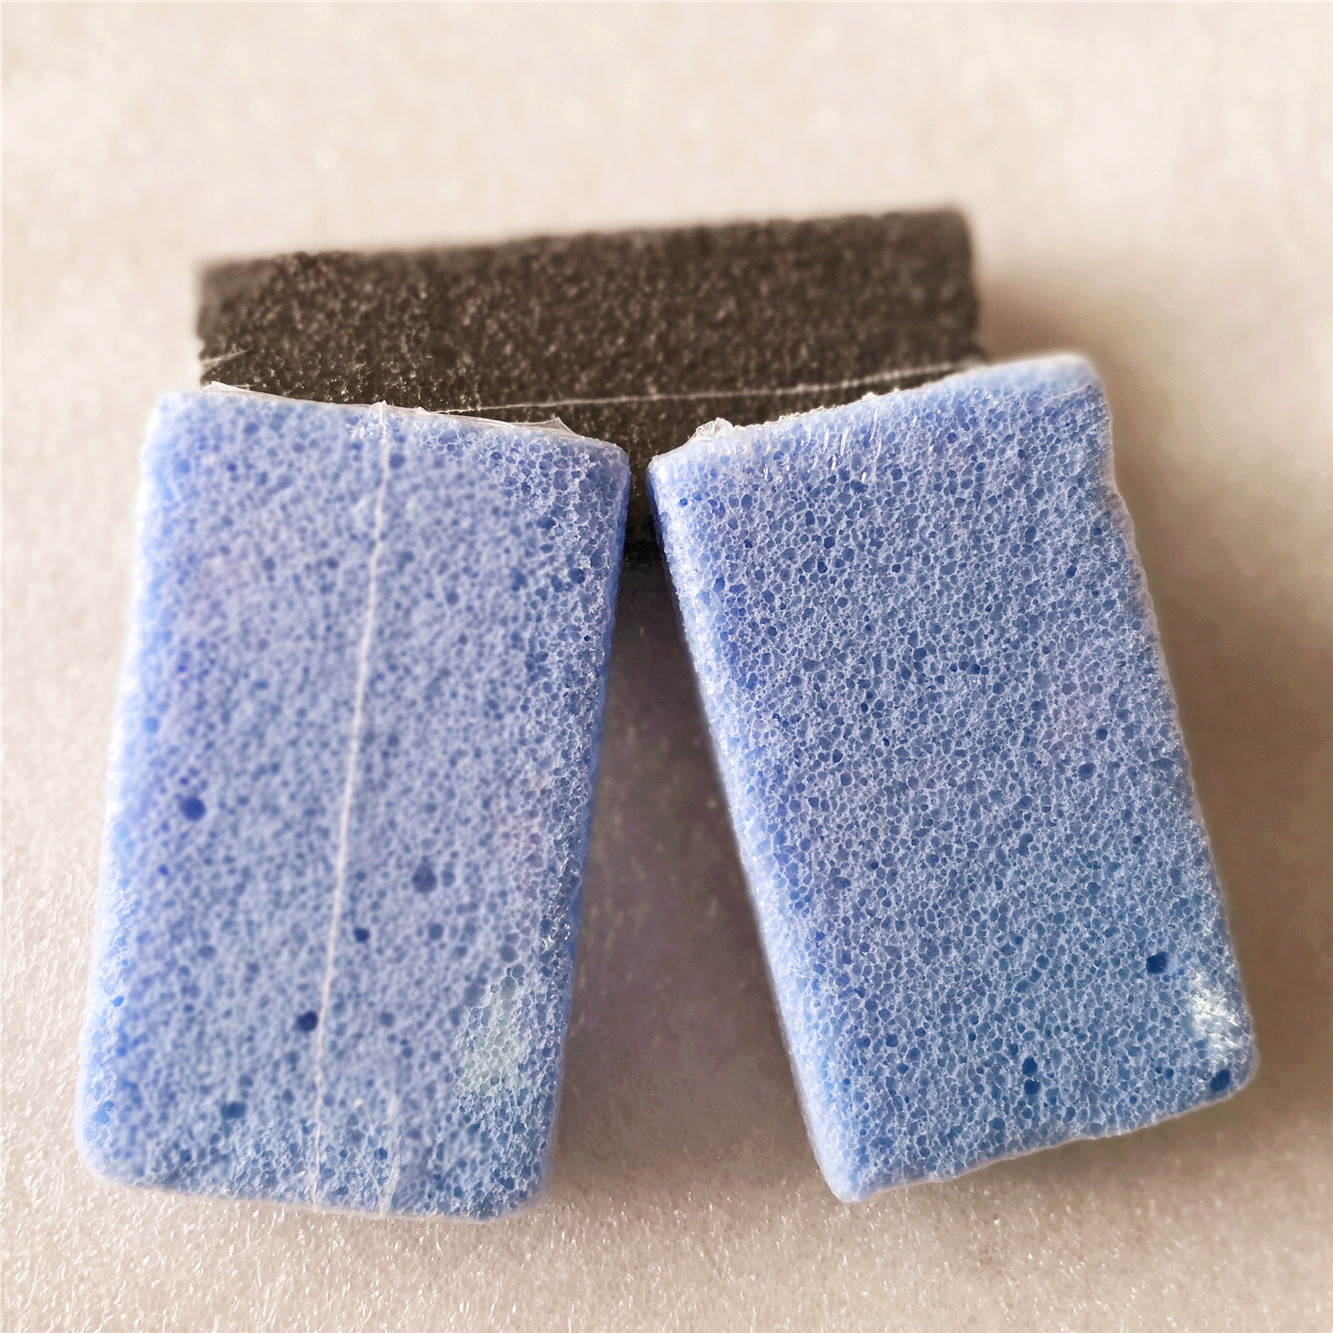  Professional Double Sided Pumice Stone Best Feet Files Pedicure Scrubber